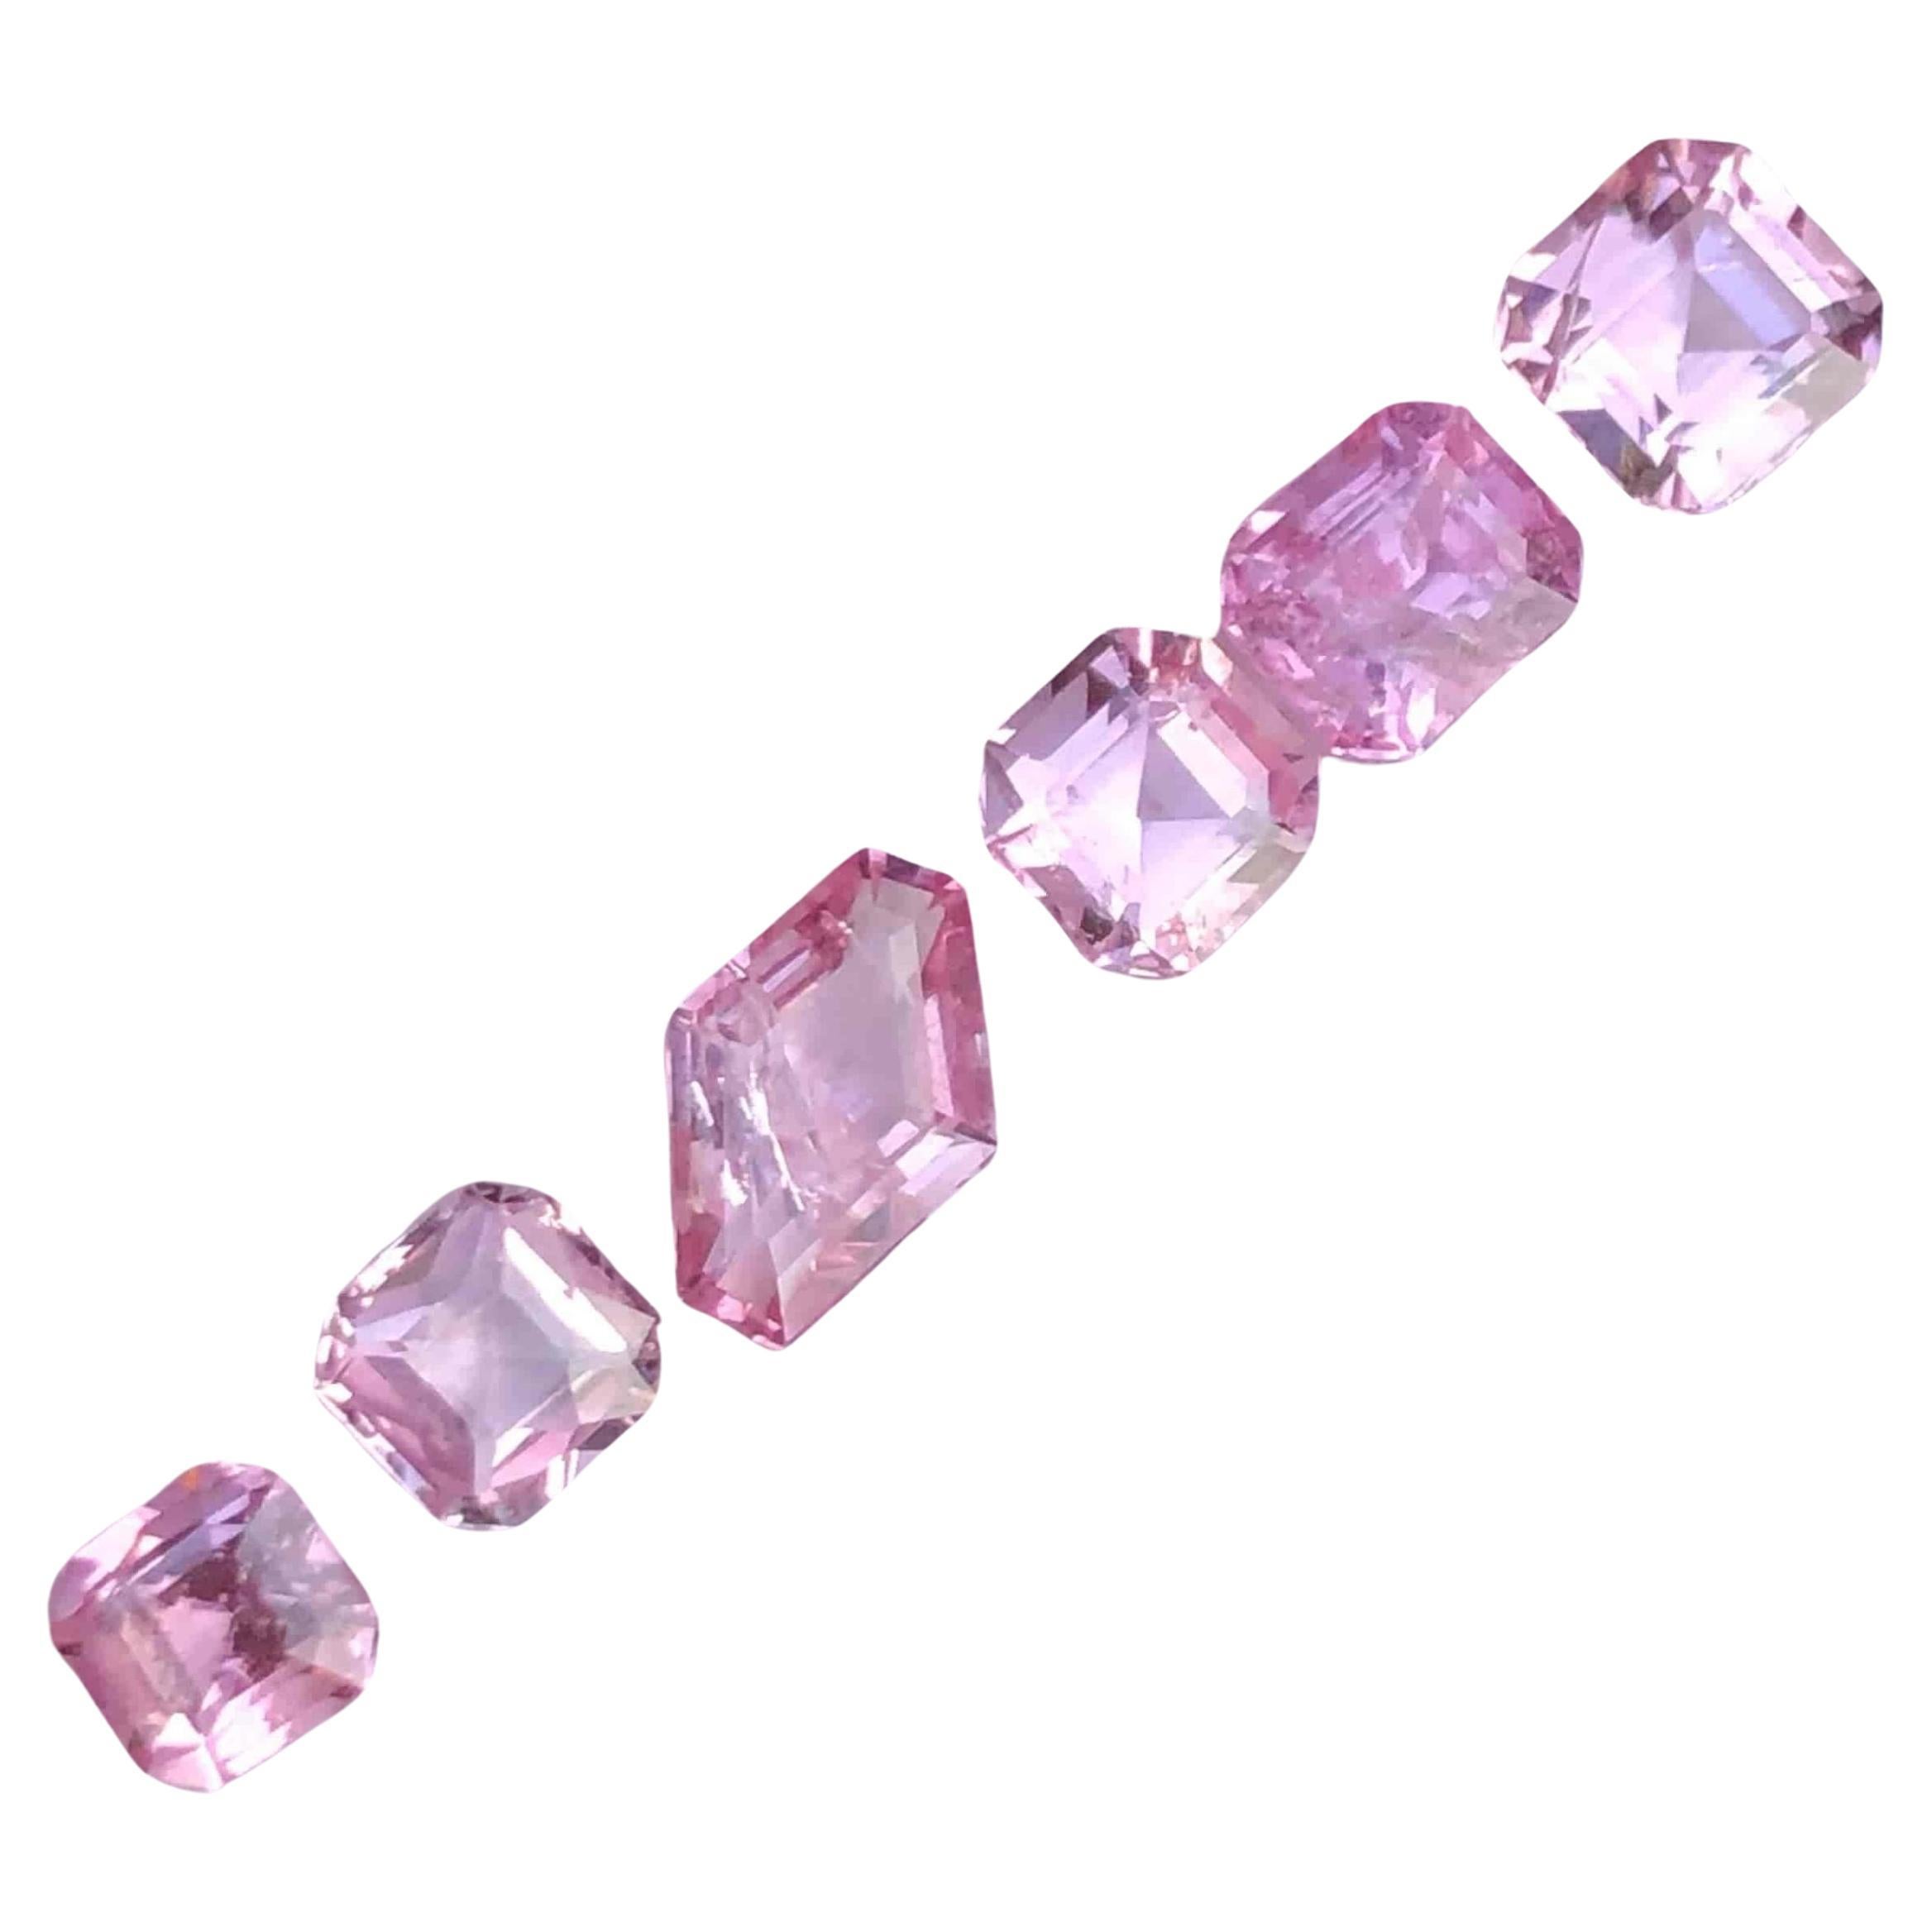 4.40 carats Pink Spinel Stones Lot Natural Loose Gemstones From Tajikistan 